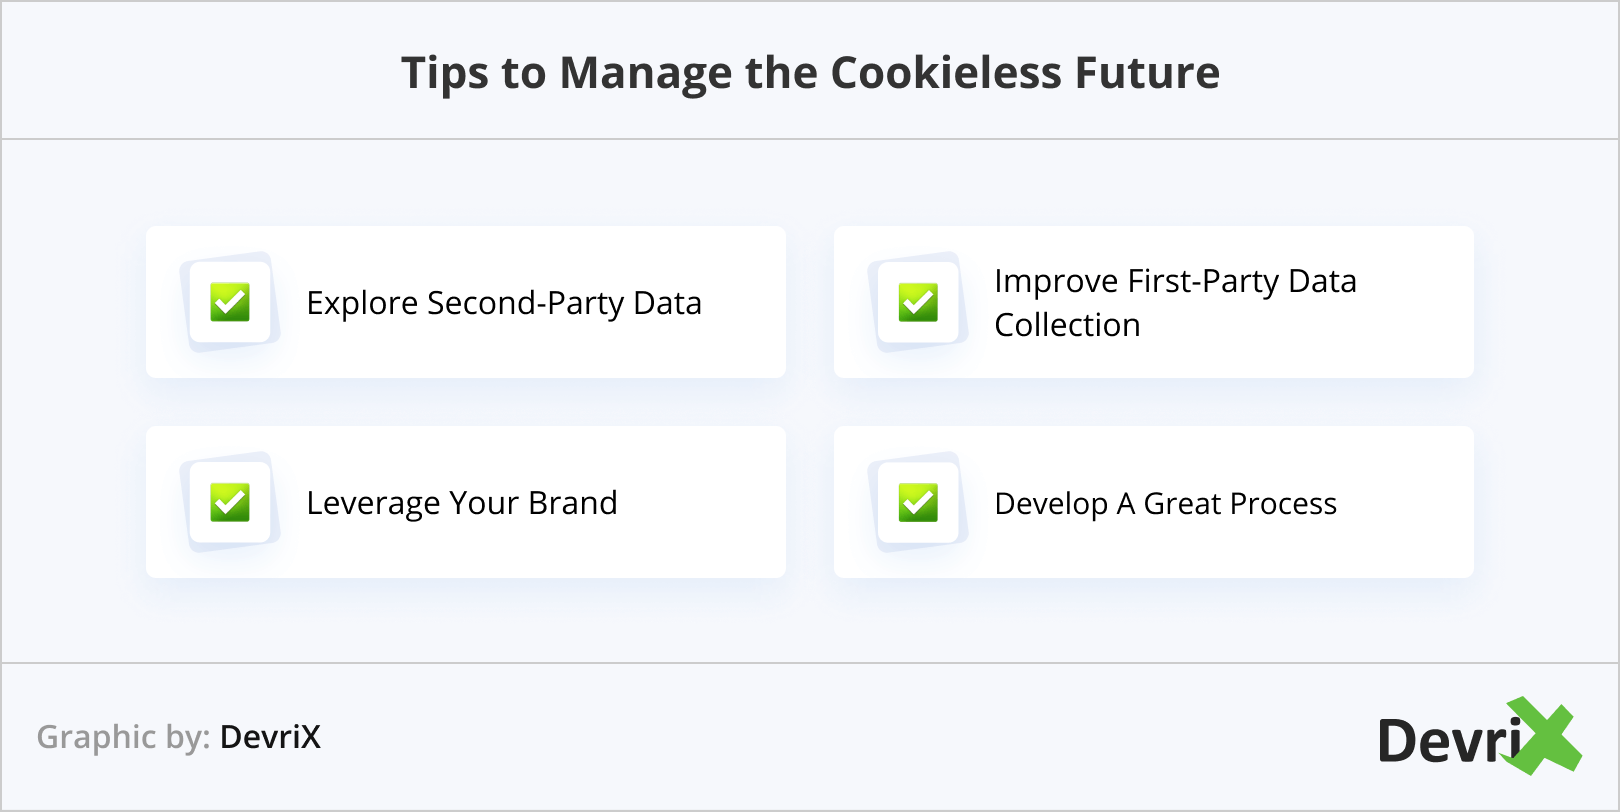 Tips to Manage the Cookieless Future